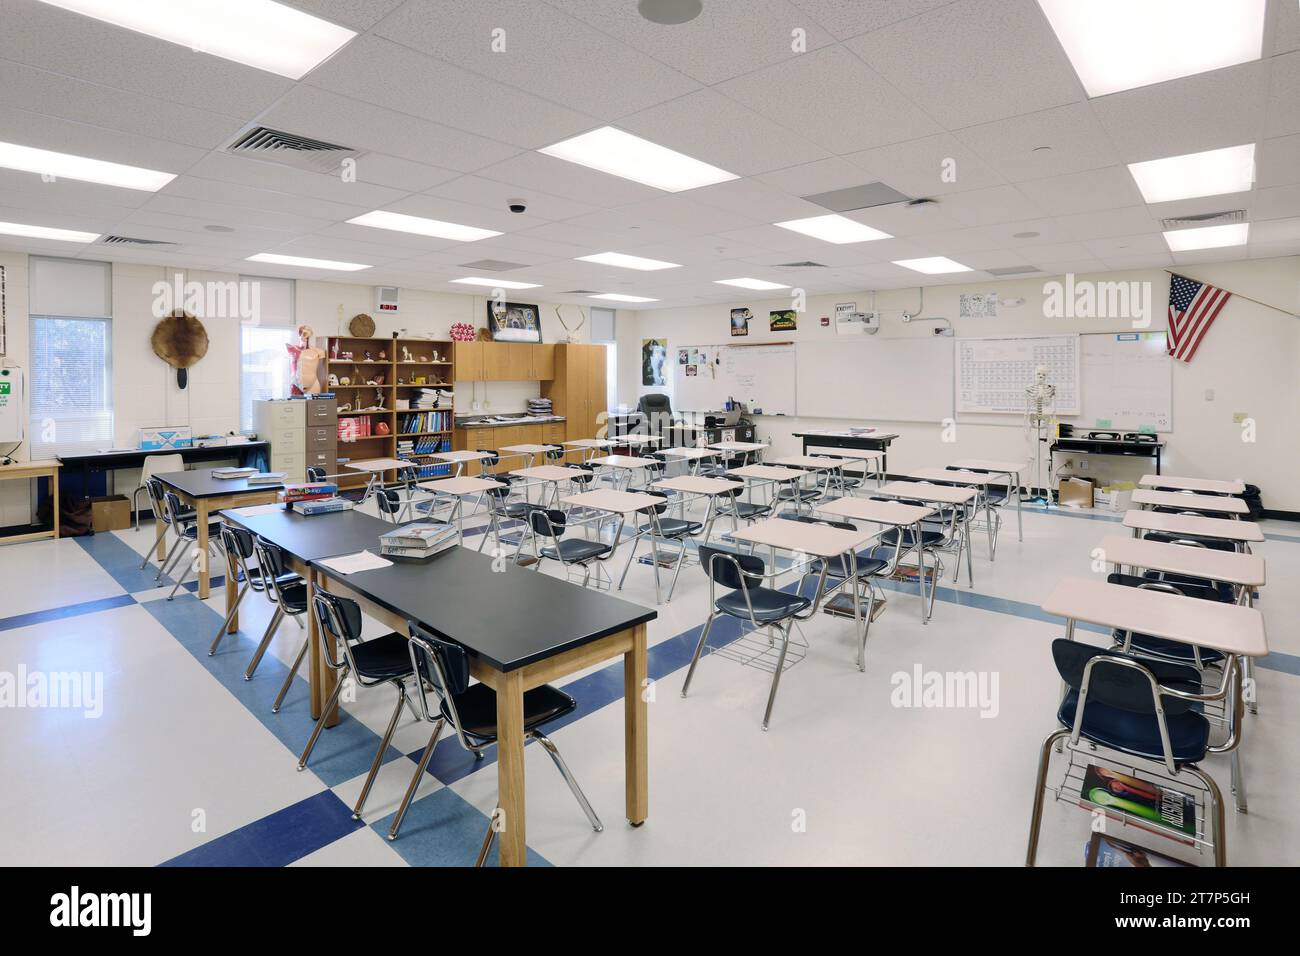 A science classroom with desks, tables, lab area, and biology models, in a new modern high school Stock Photo